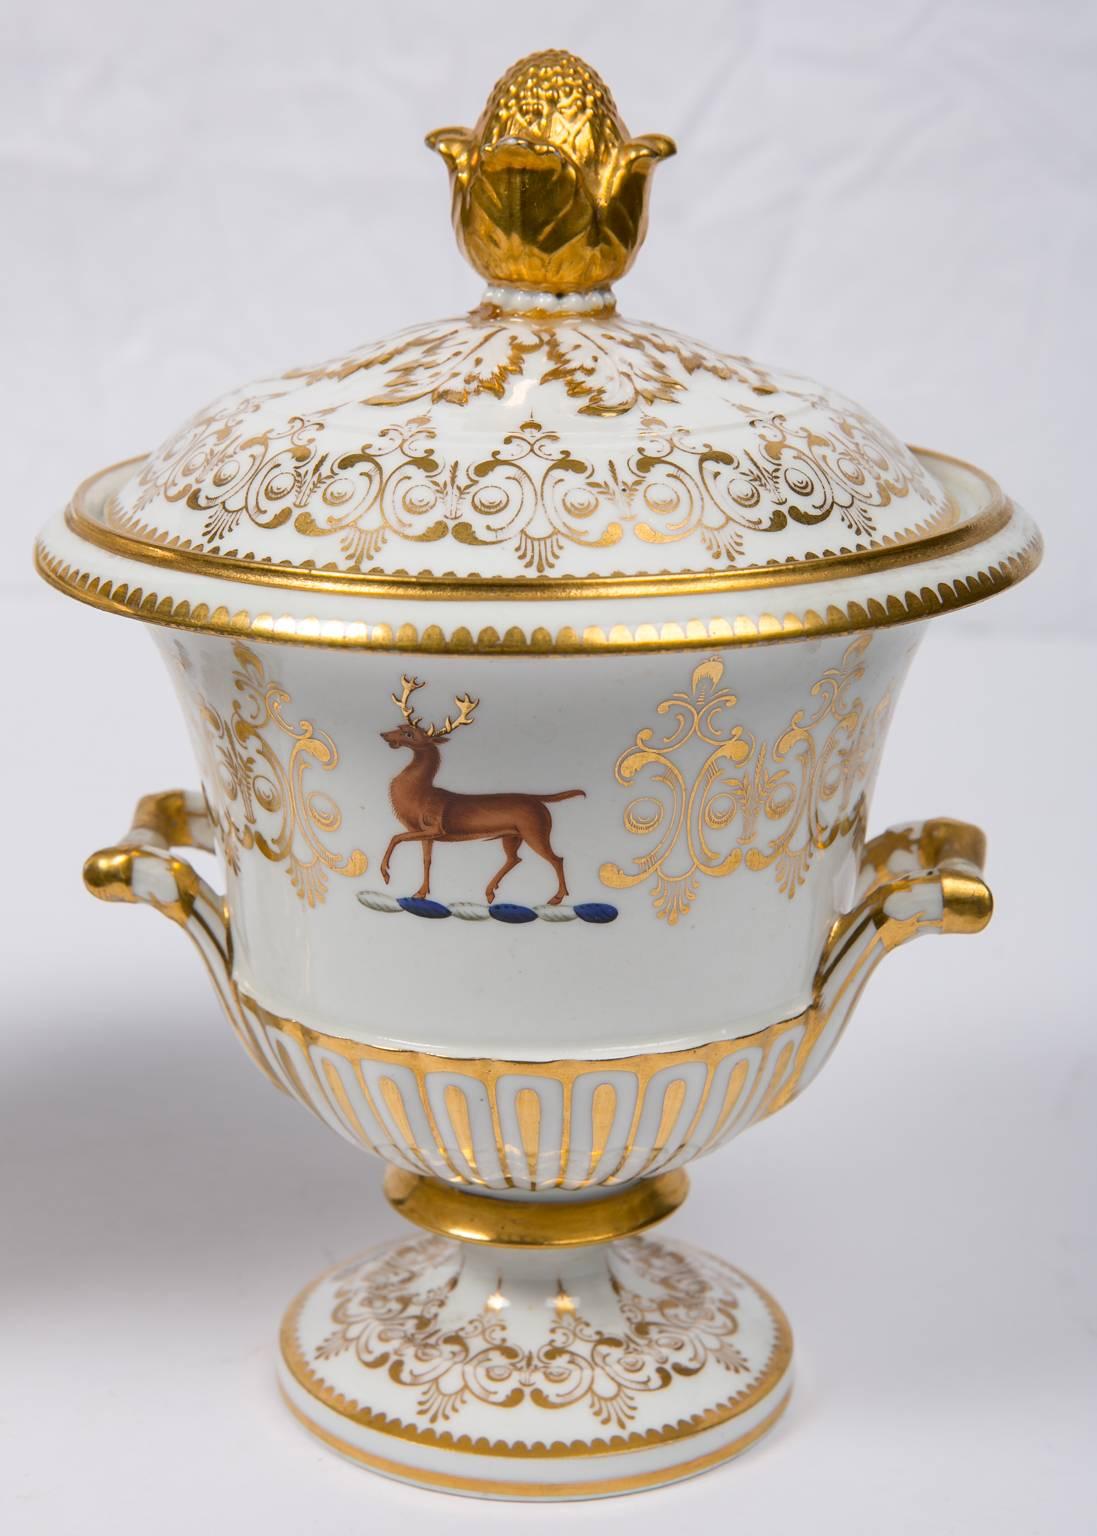 Regency Pair of Tureens with Armorial Crests